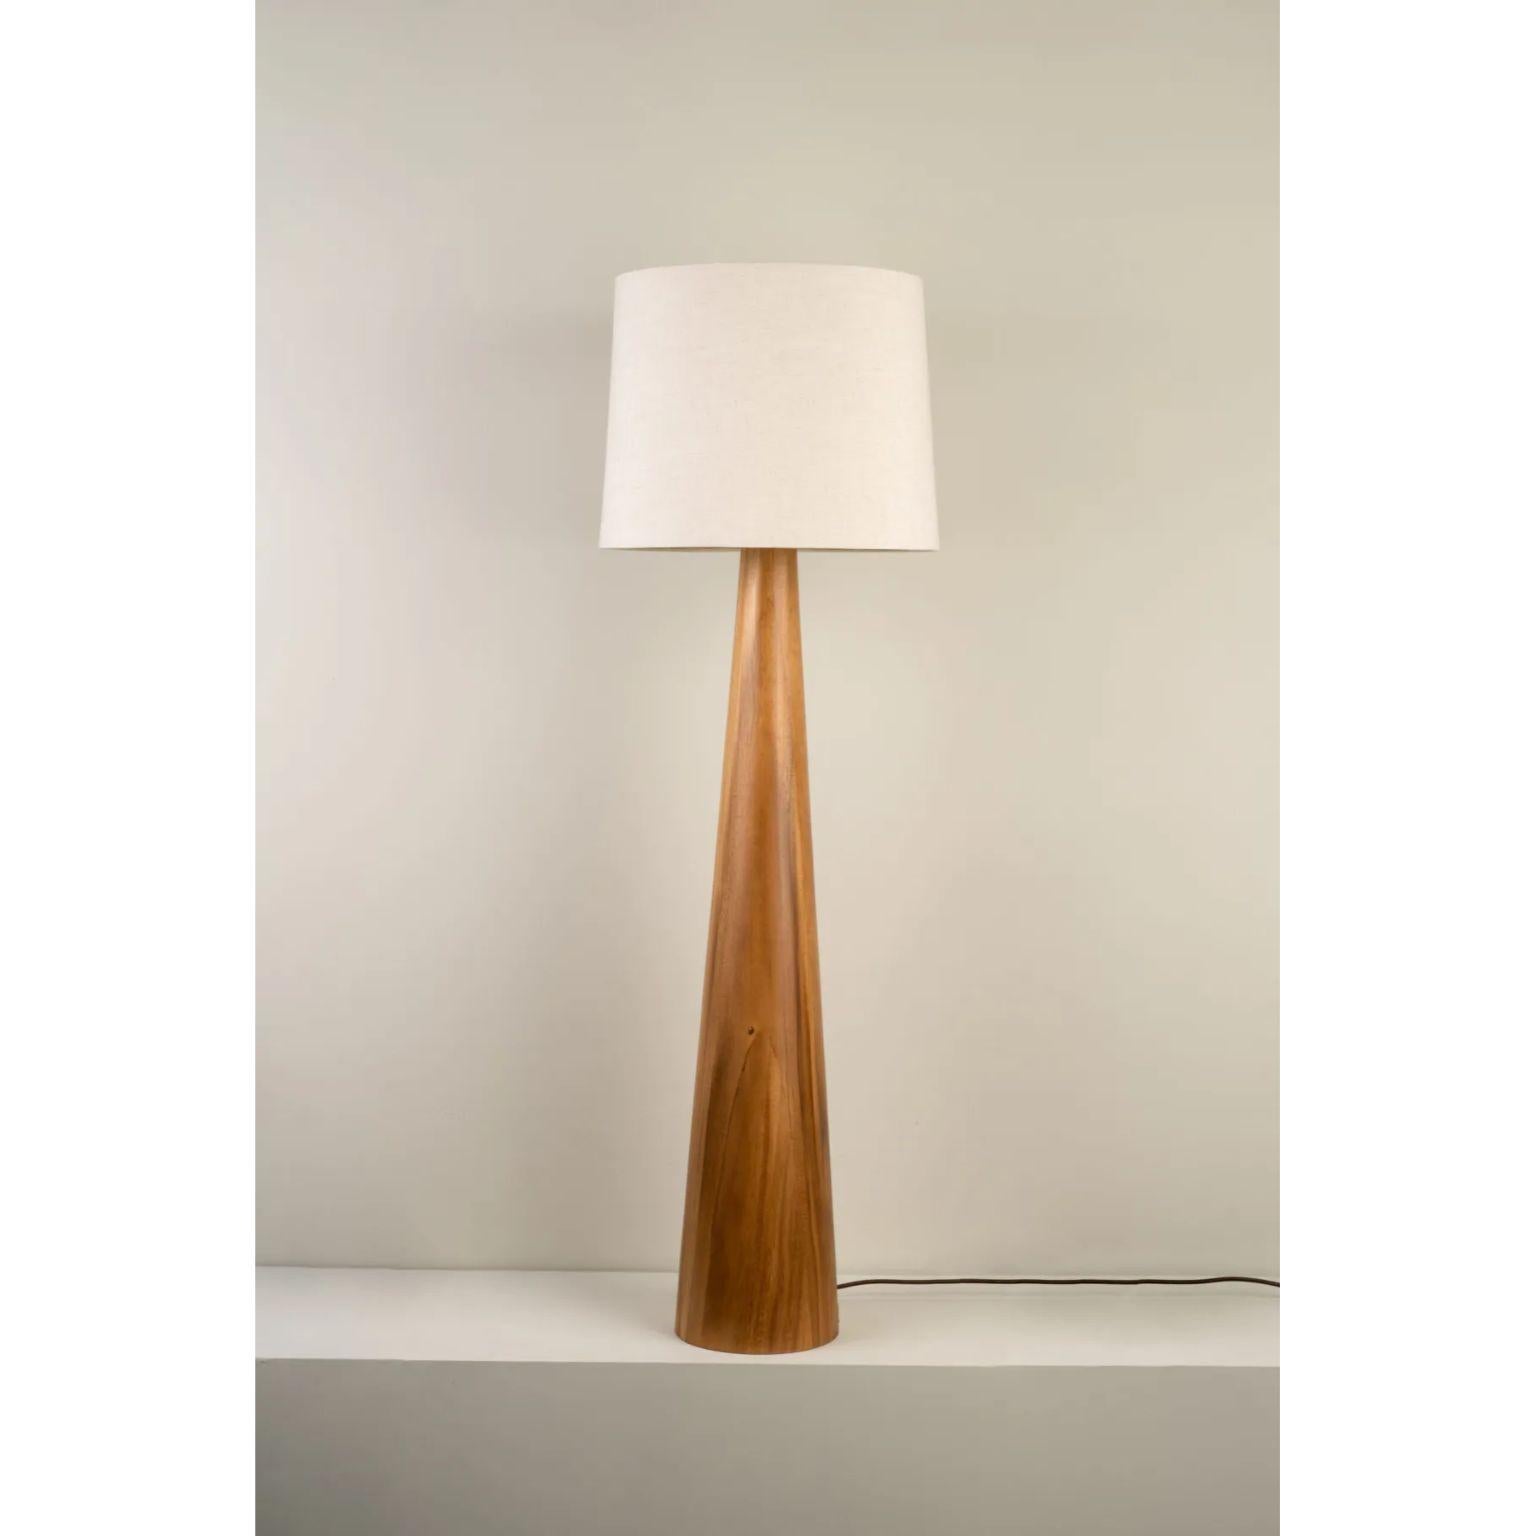 Malva Floor Lamp by Isabel Moncada
Dimensions: Ø 50 x H 160 cm.
Materials: Turned parota wood, fiberglass and linen.

The cone is a balanced geometric figure. Malva is minimalist, with stable and sturdy wood. The lampshade is just slightly broader